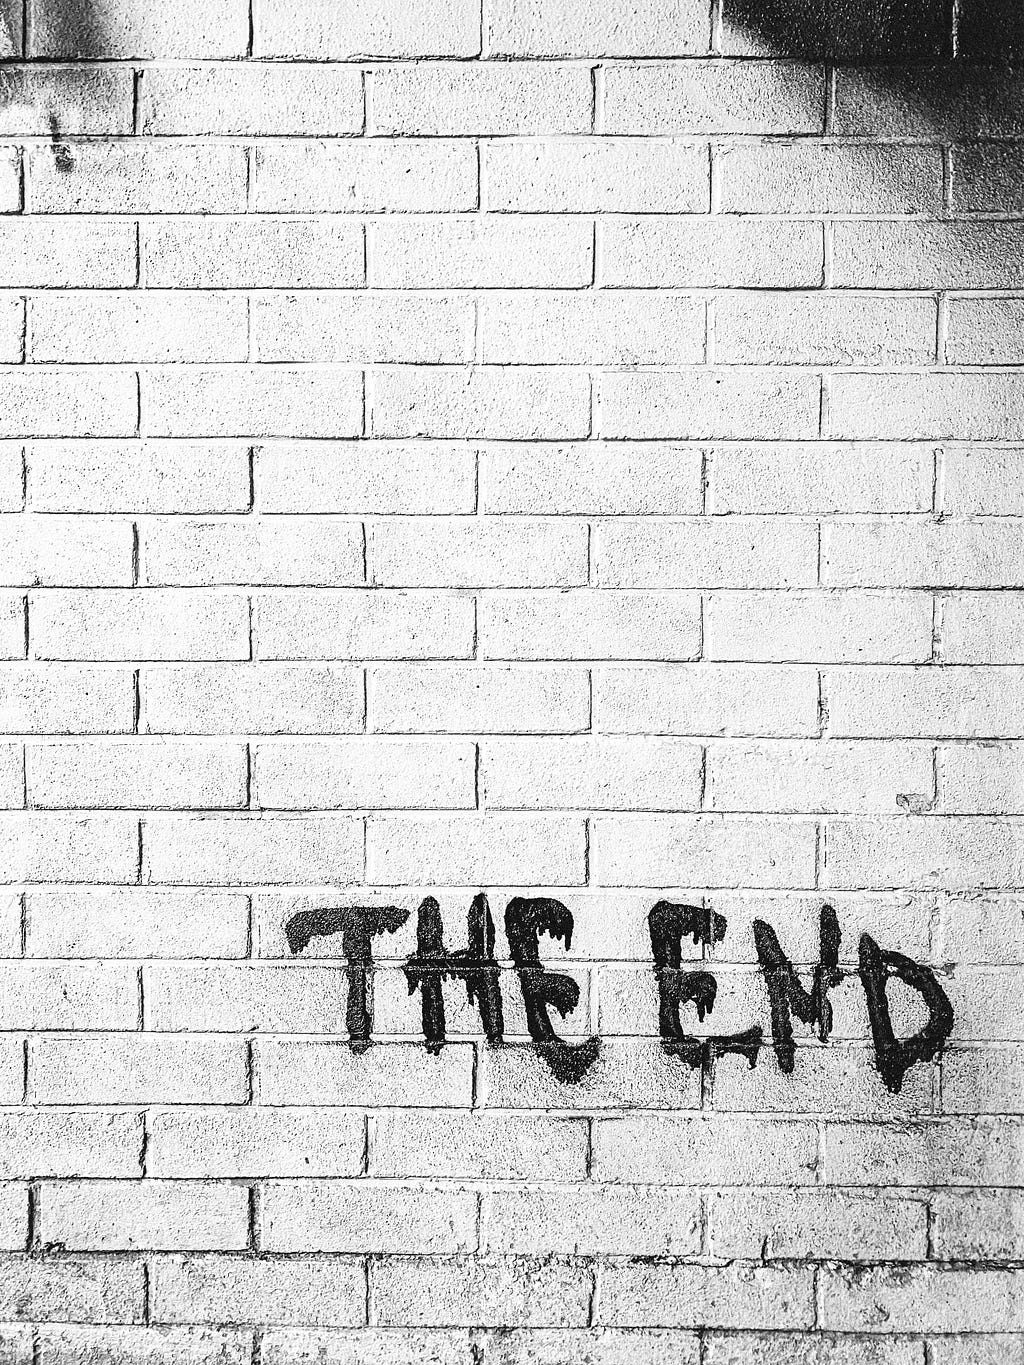 A black and white photo of a brick wall with “THE END” spraypainted on it